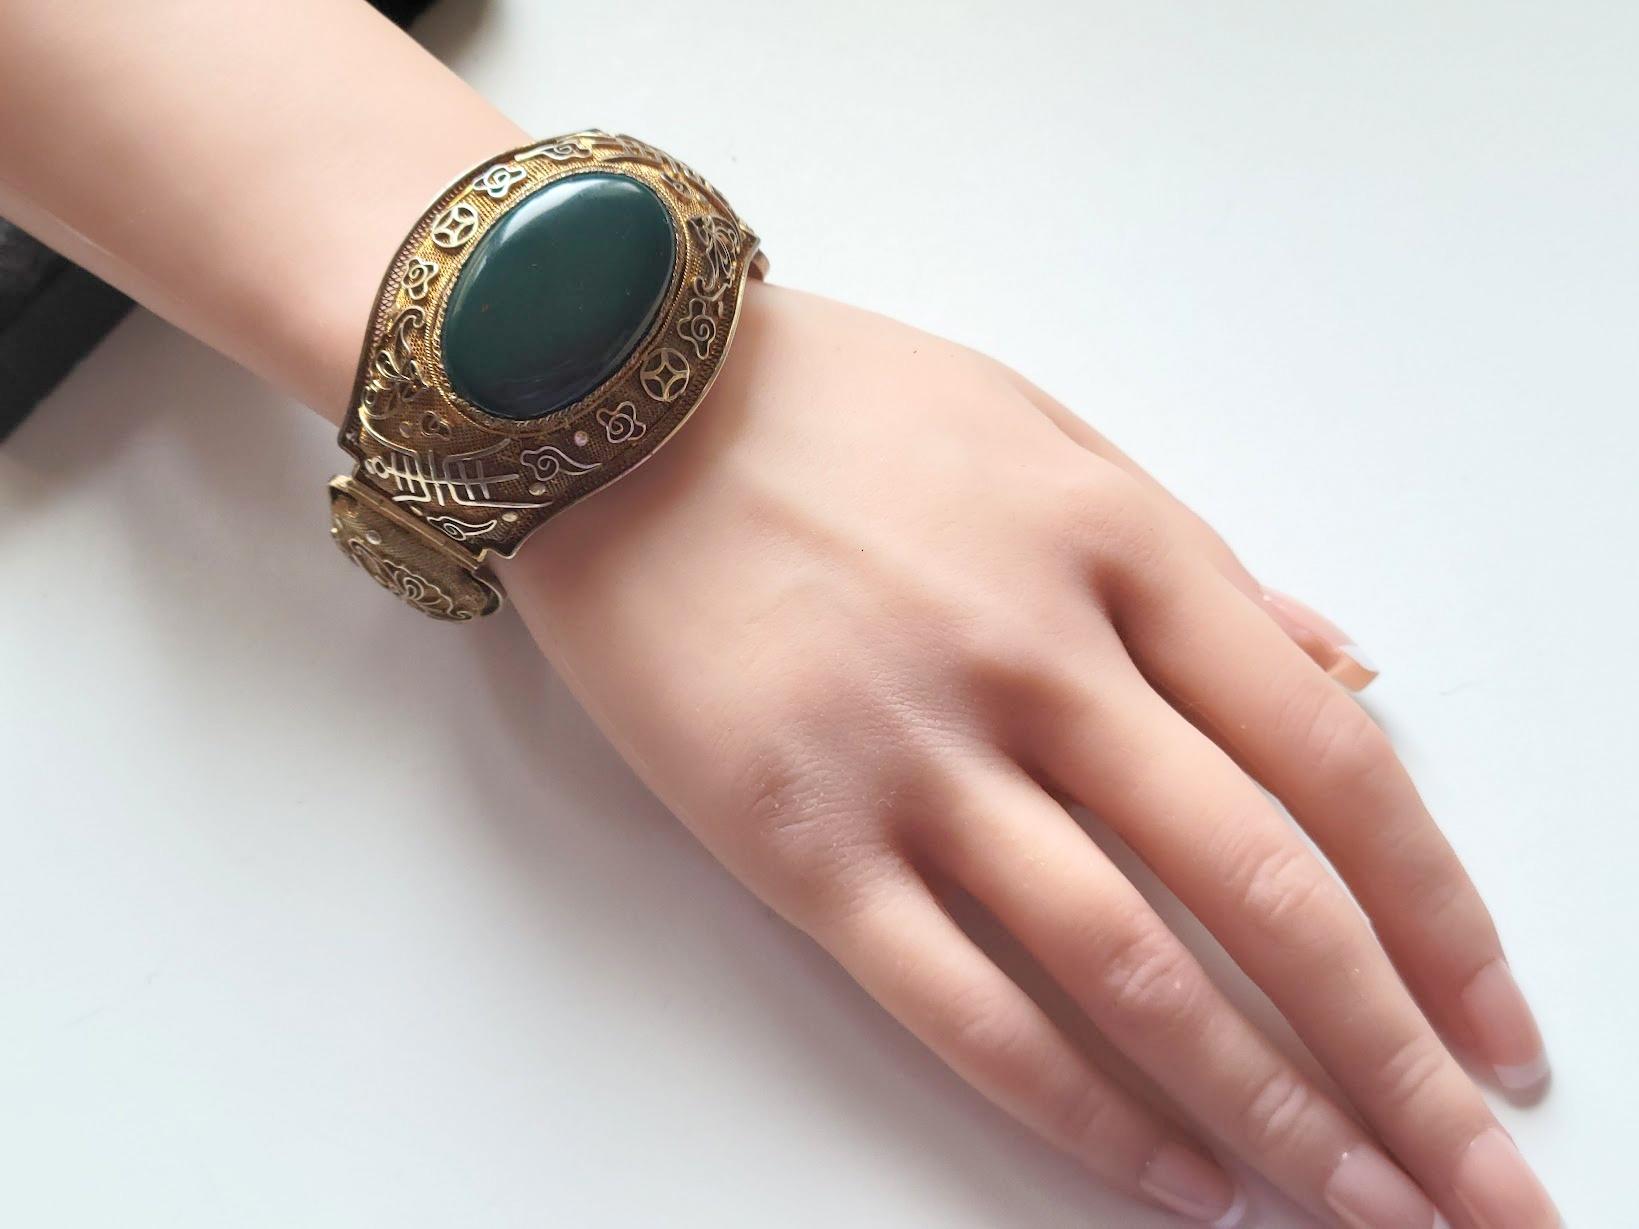 Vintage Chinese Export Filigree Gilded Silver Bracelet With Bloodstone Cabochon For Sale 2